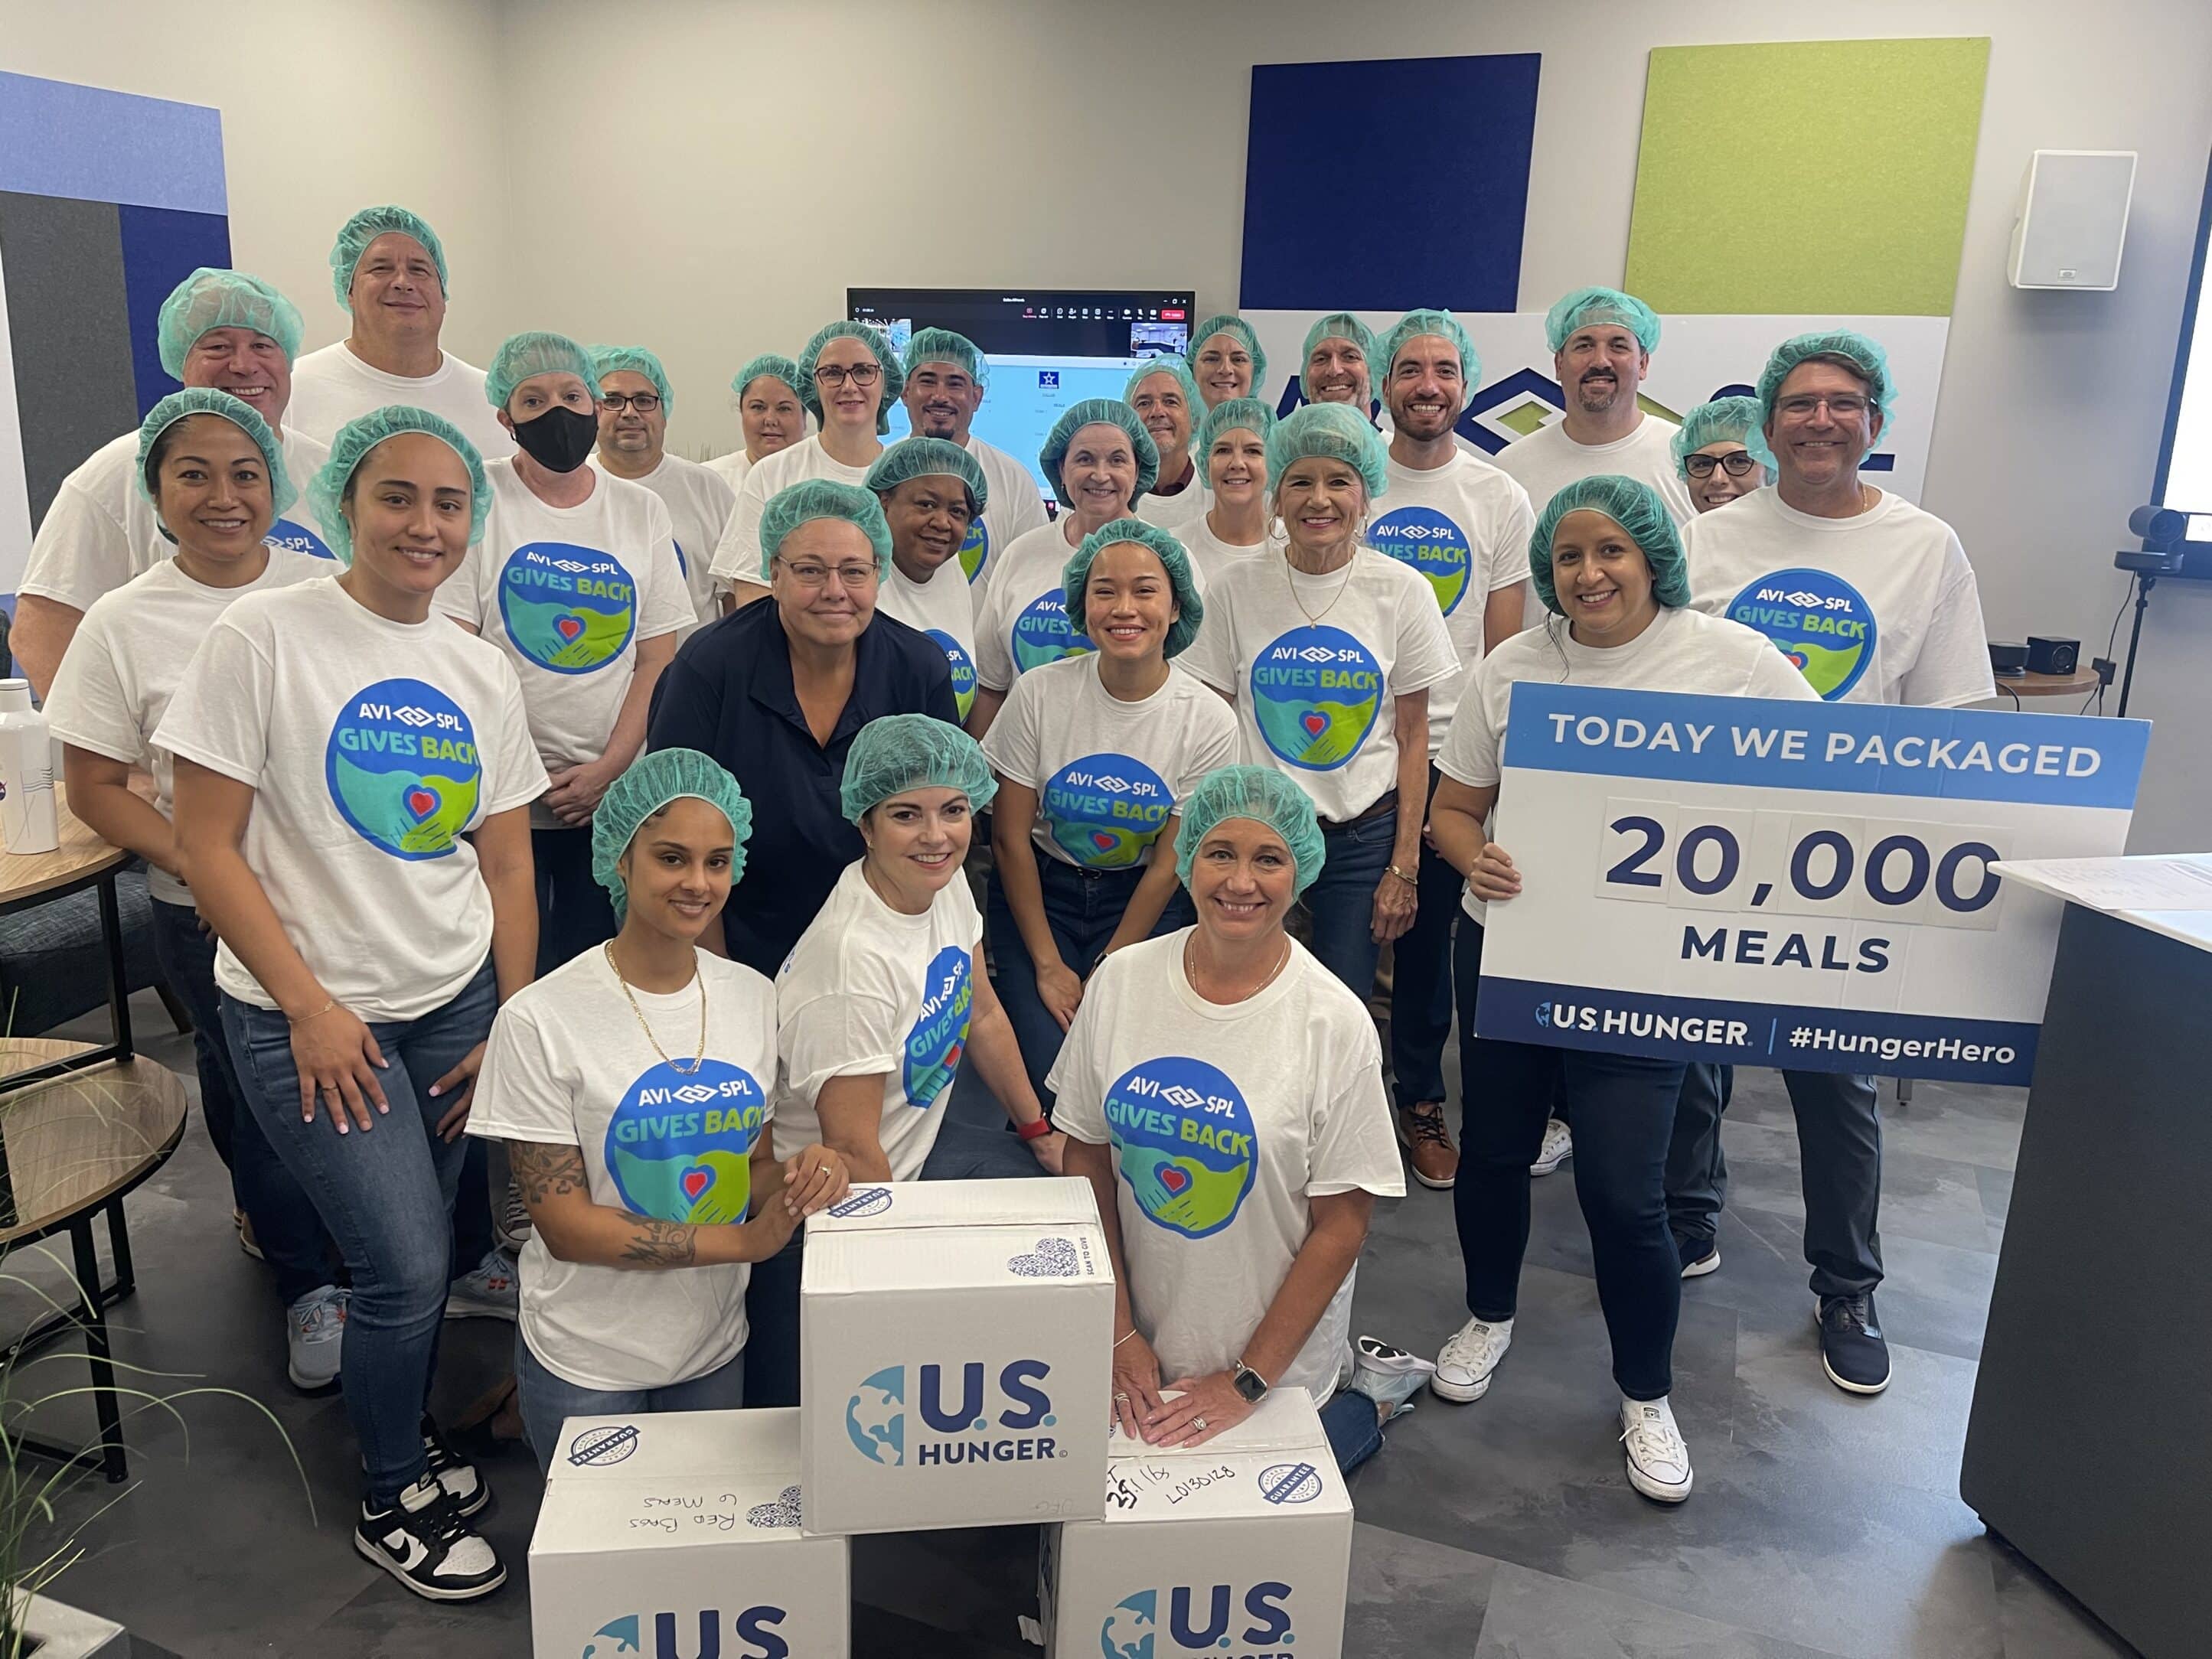 Tampa AVI-SPL employees celebrating packing 20,000 meals for the community